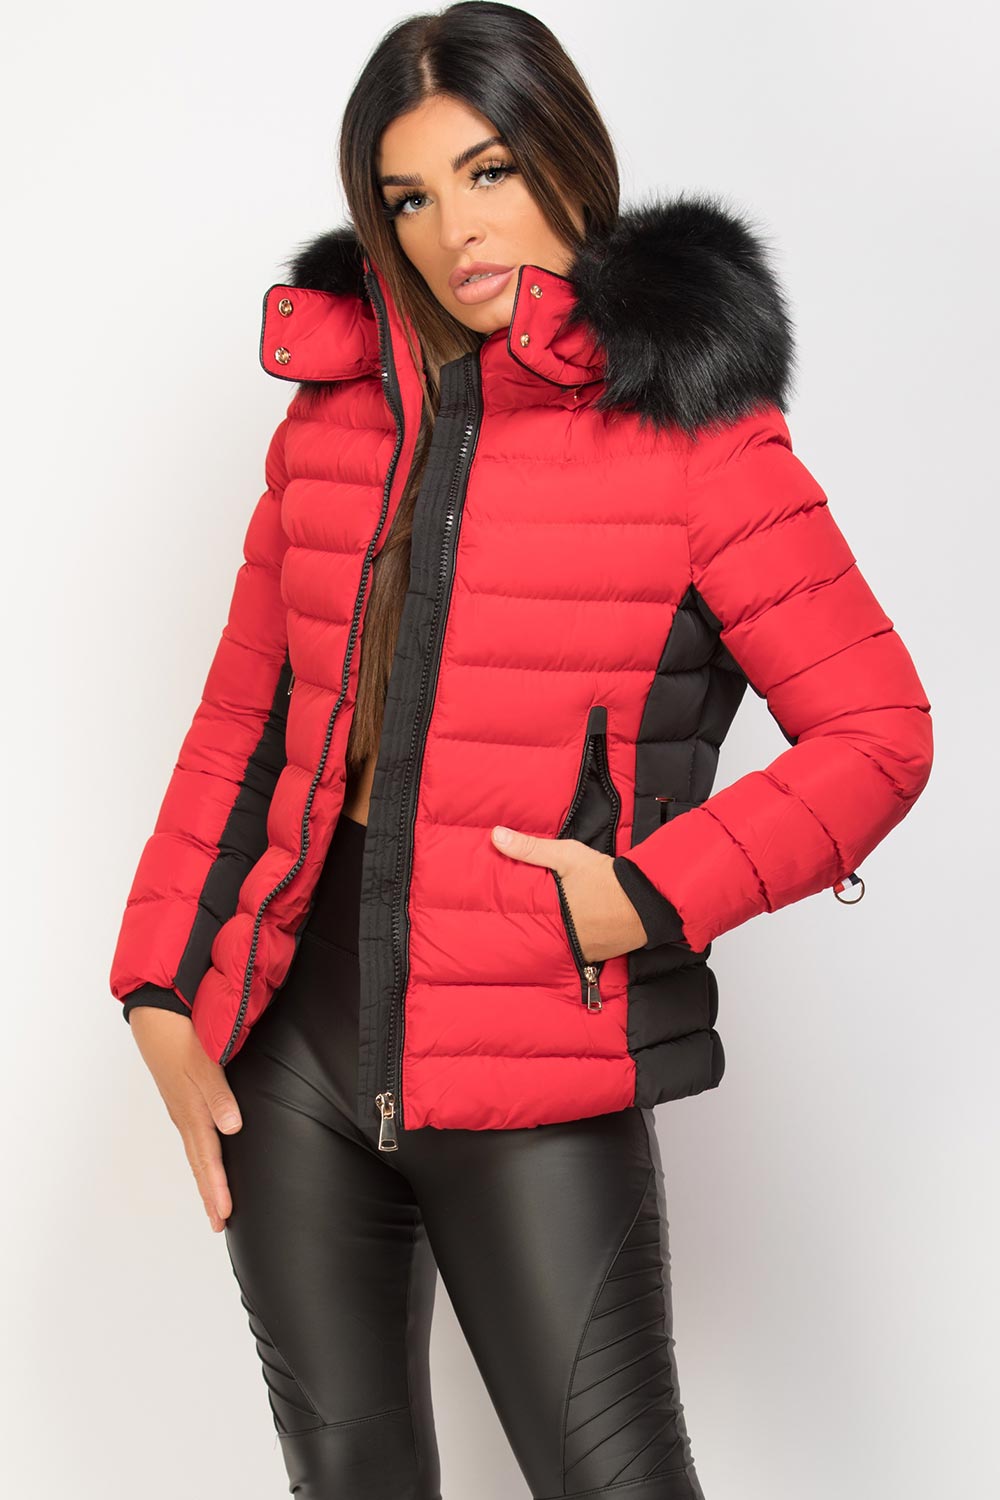 red puffer jacket with faux fur hood uk